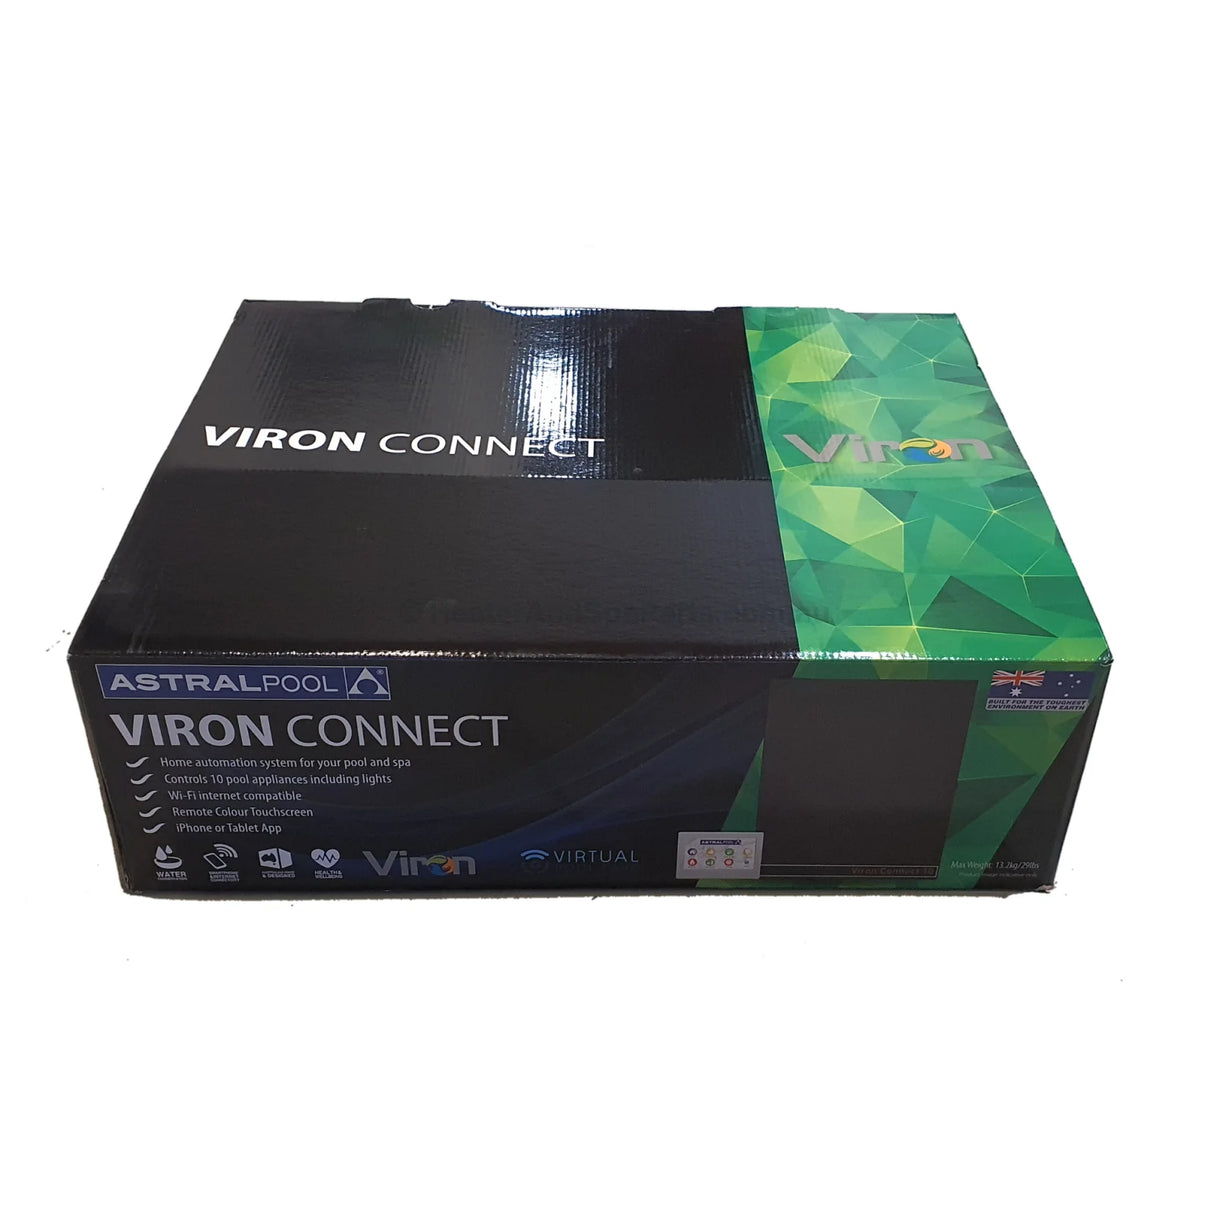 Astralpool Viron Connect 10 Pool & Spa Control System - Vic Only - Heater and Spa Parts